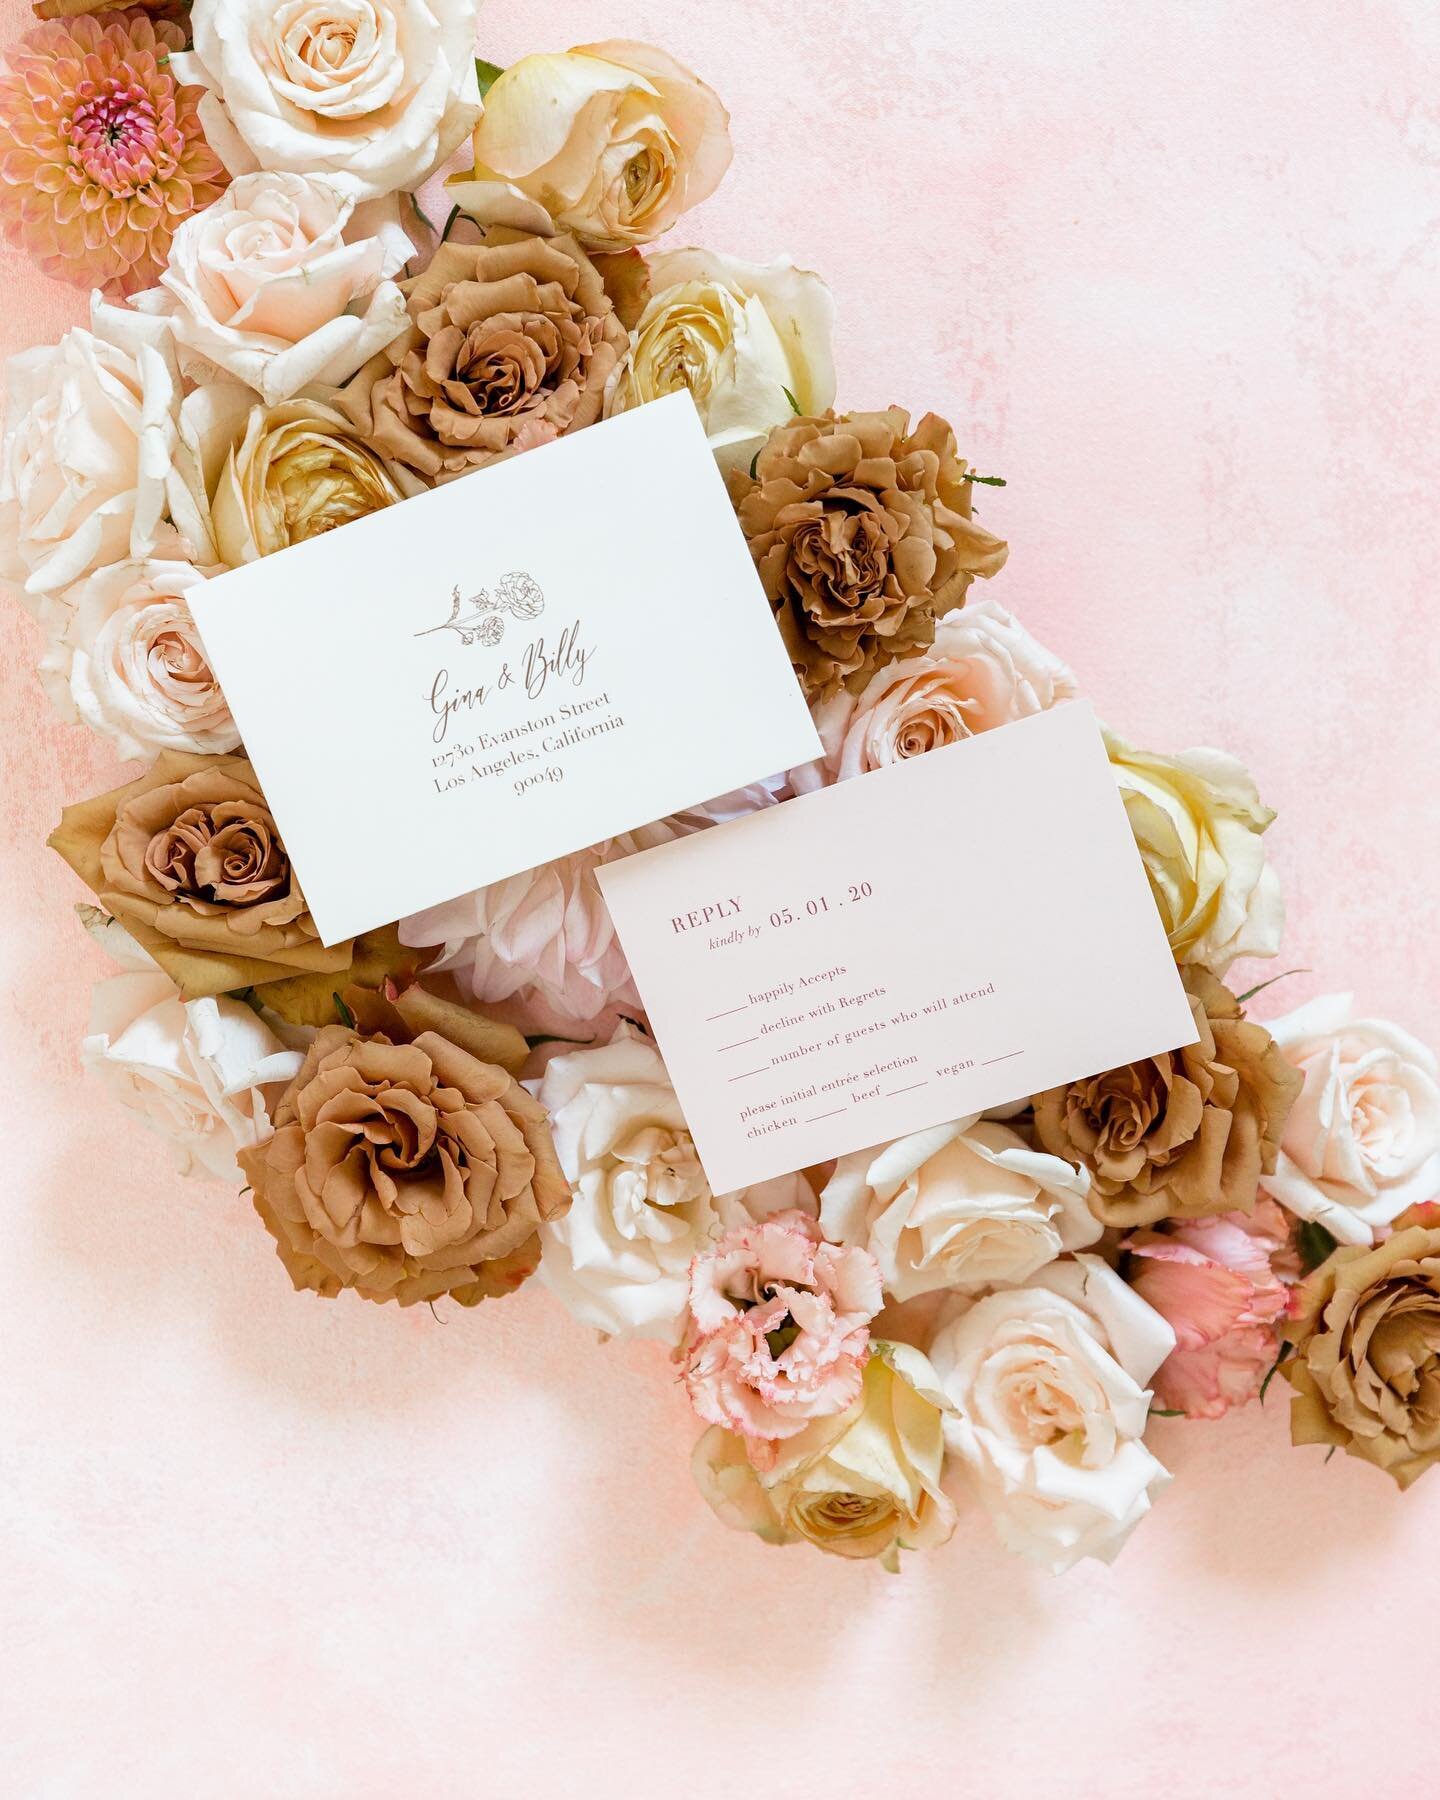 Pretty RSVP details ✨🌸
⠀
Featured on @southerncaliforniabride @aislesociety @100_layercake @friartux Stylist Magazine 2021
⠀
Planning &amp; Design @bowtiesnbouquets @styledshootchallenge
Assistant @bowtiesbouquets_courtney
Photography &amp; Videogra